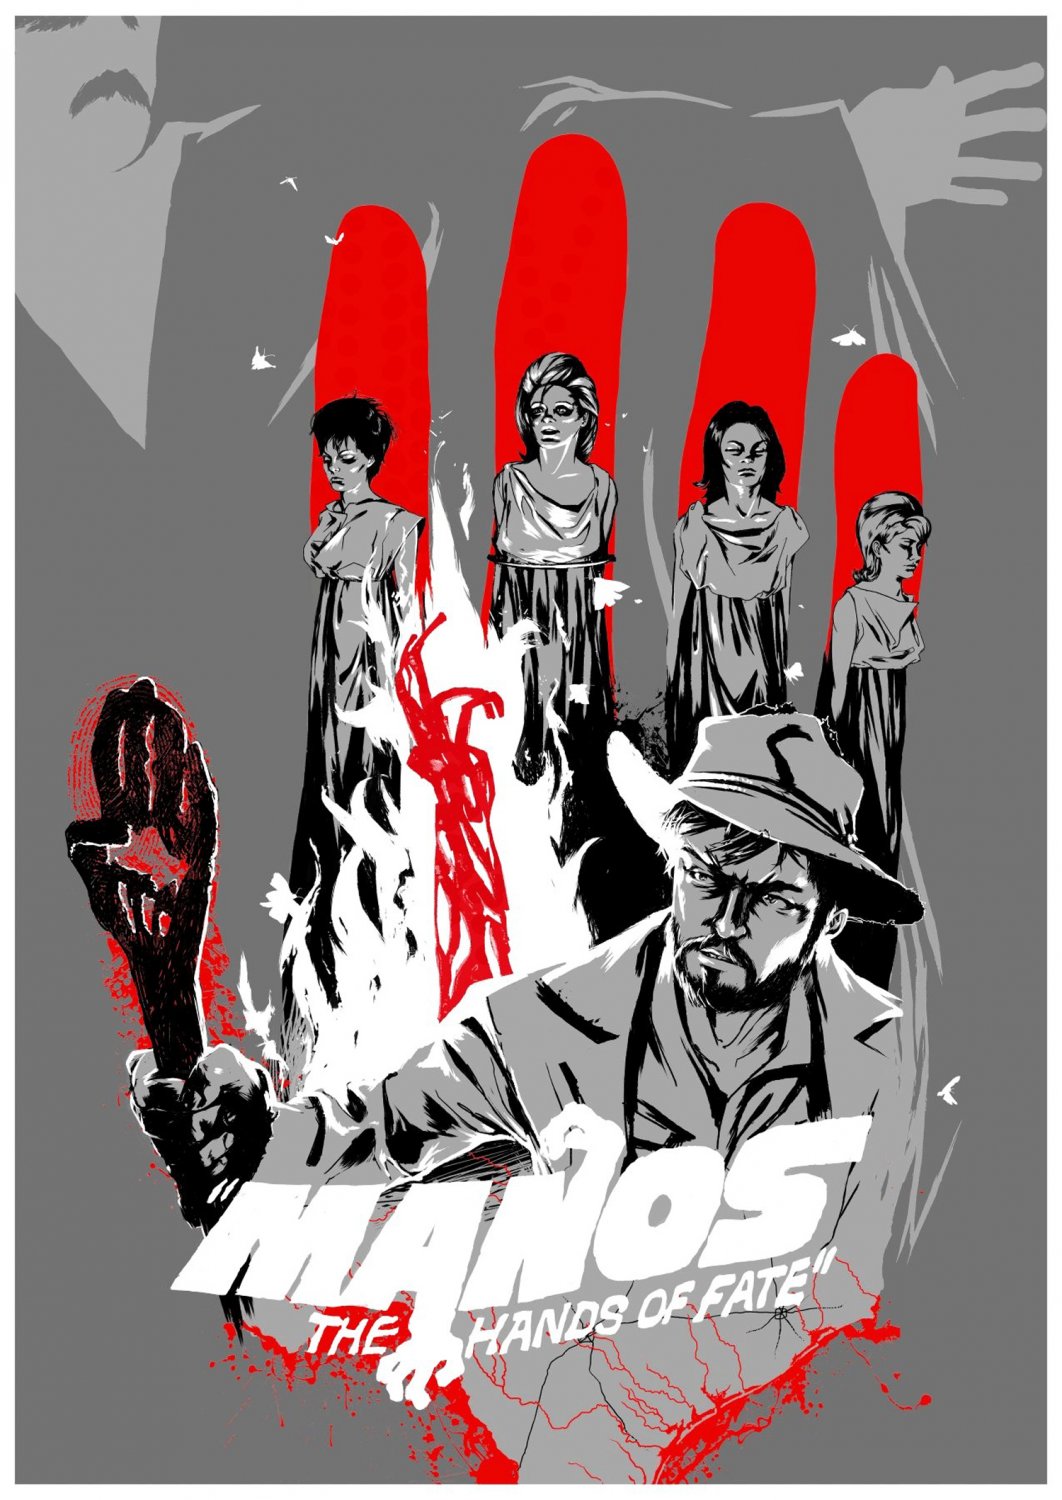 Manos: The Hands of Fate (DVD)